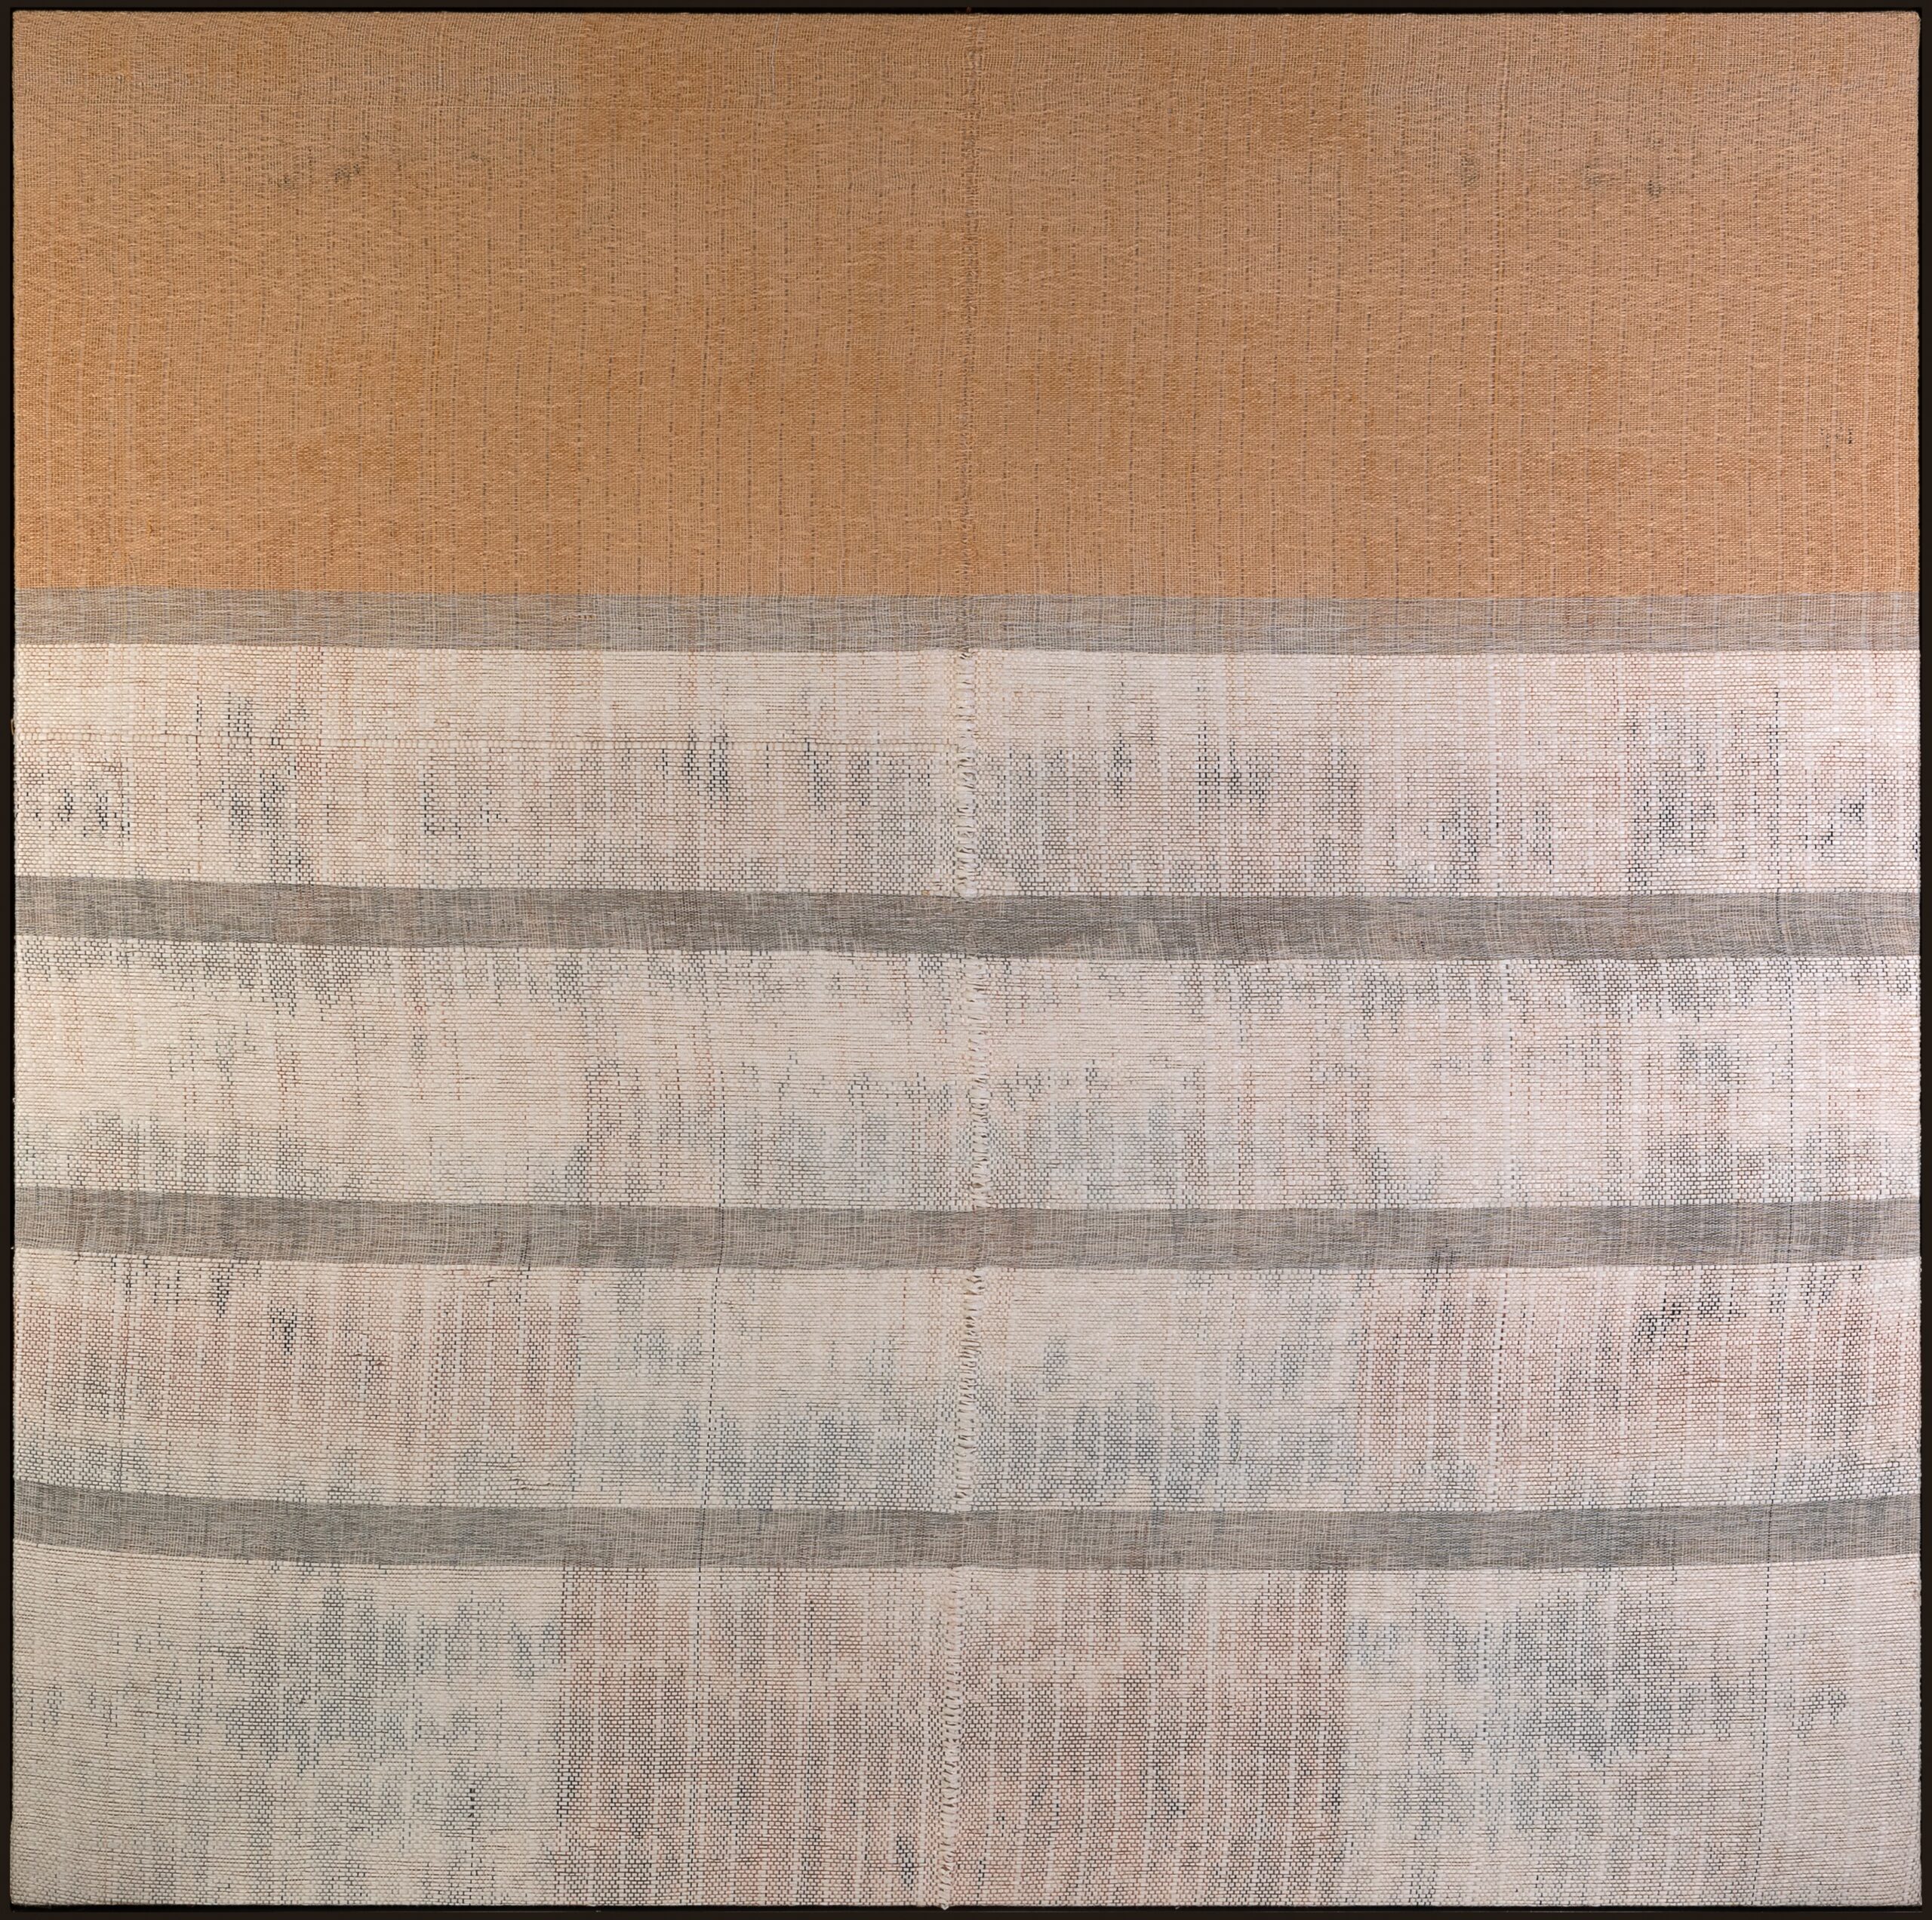 
							

									Elizabeth Hohimer									Sounds Connected by Daylight 2024									paper, linen, Texas cotton, paint<br />
60 3/4 x 60 3/4 x 2 inches<br />
sold									


							